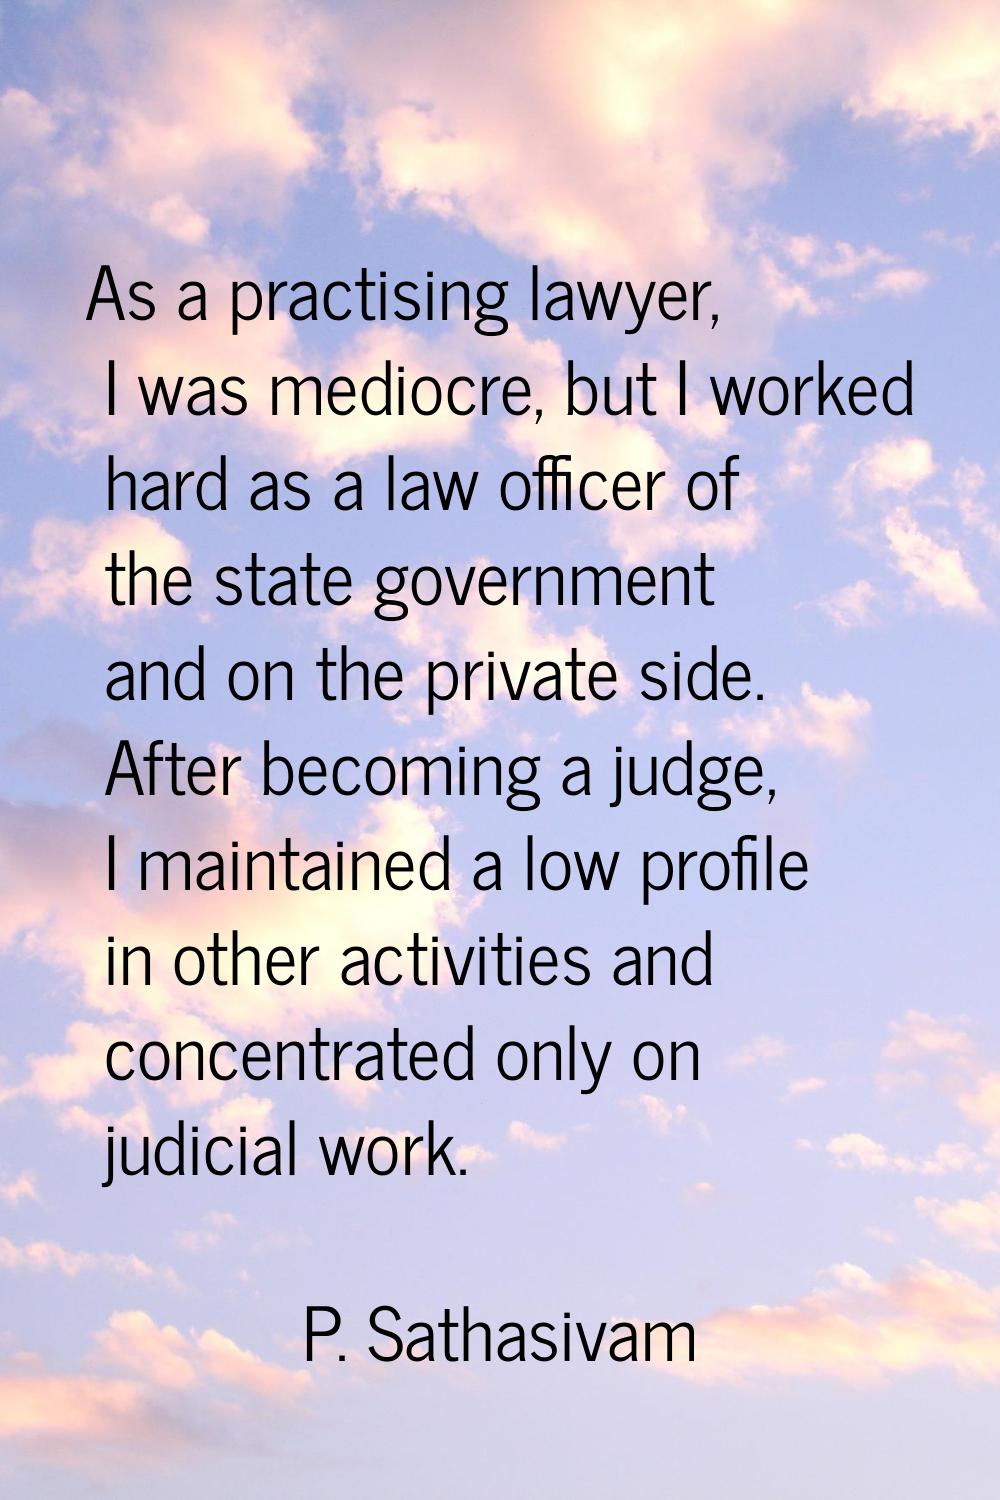 As a practising lawyer, I was mediocre, but I worked hard as a law officer of the state government 